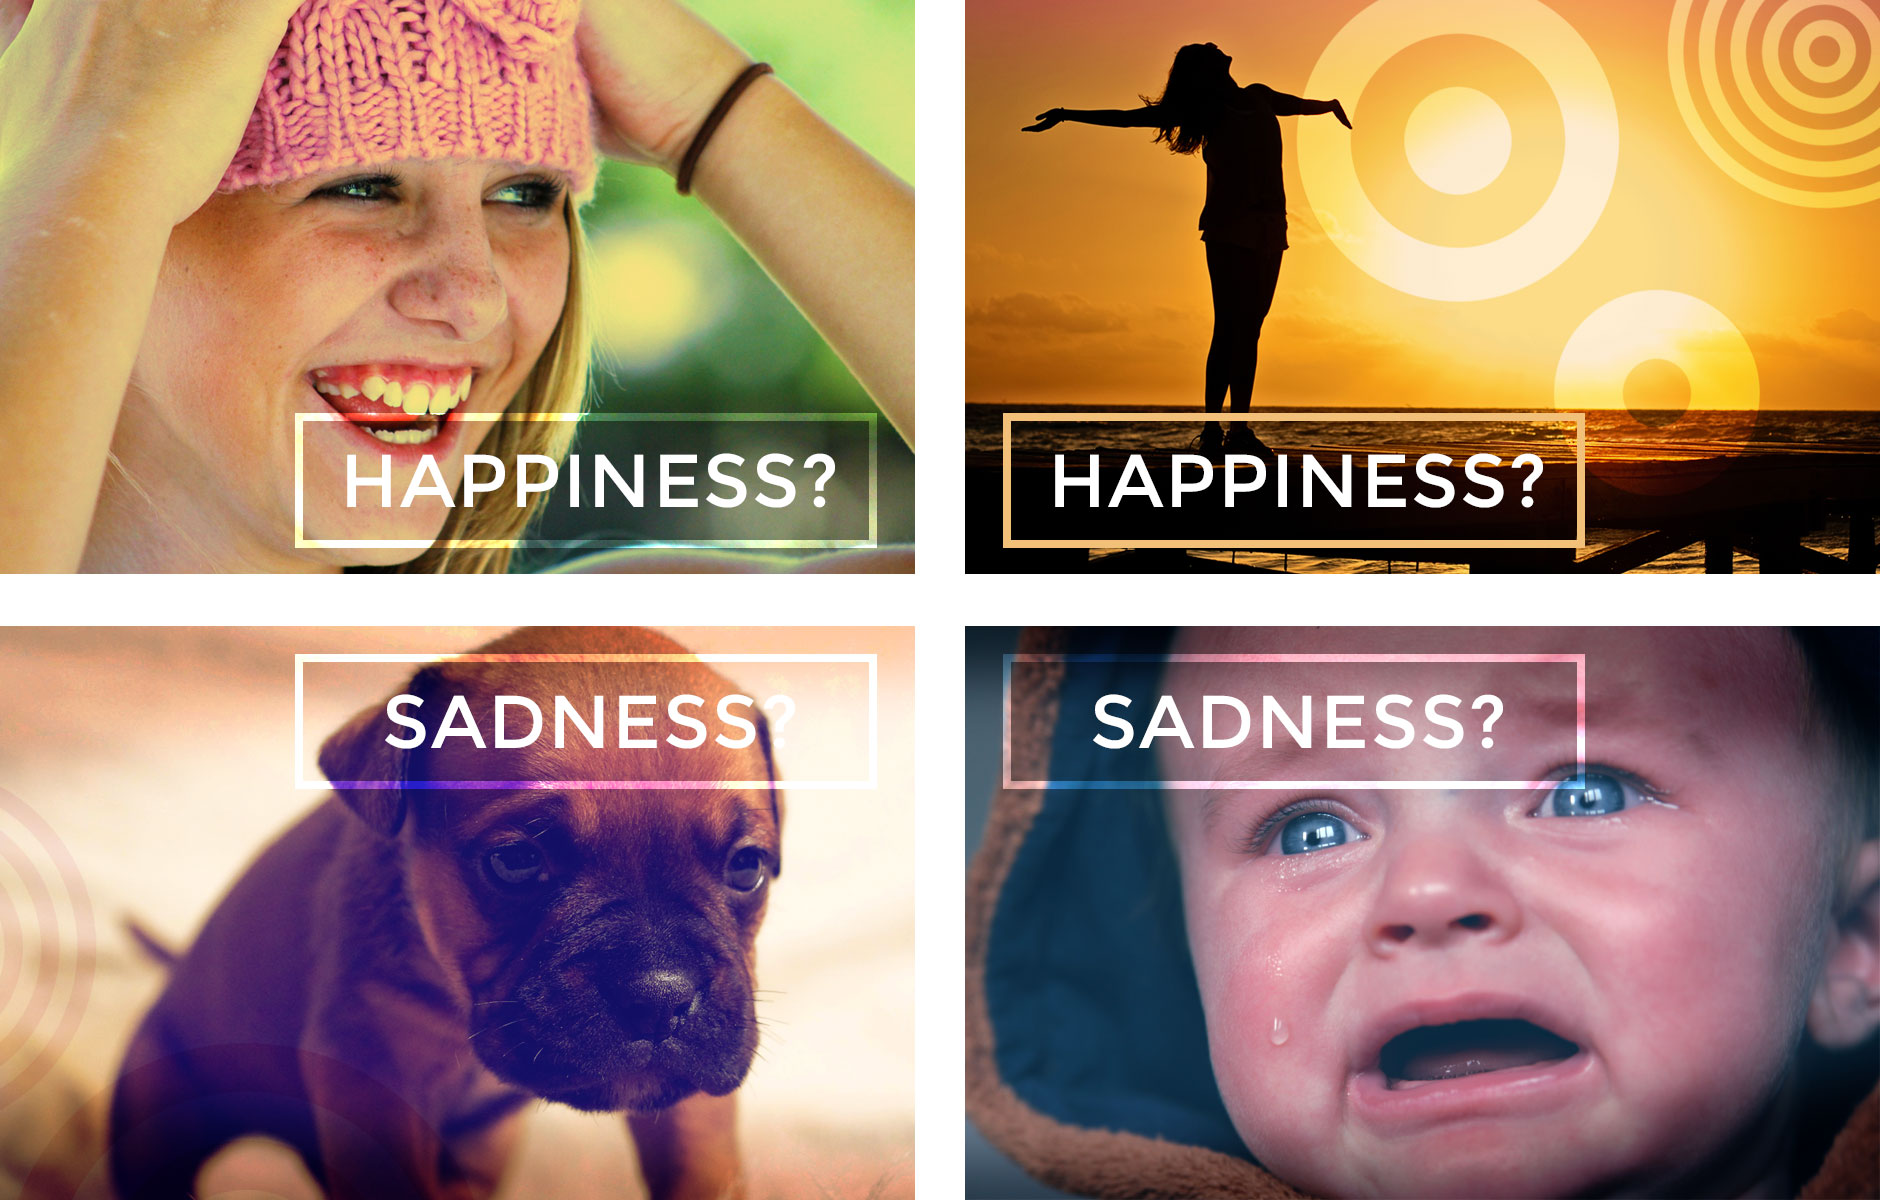 Happiness and Sadness Indexical Images